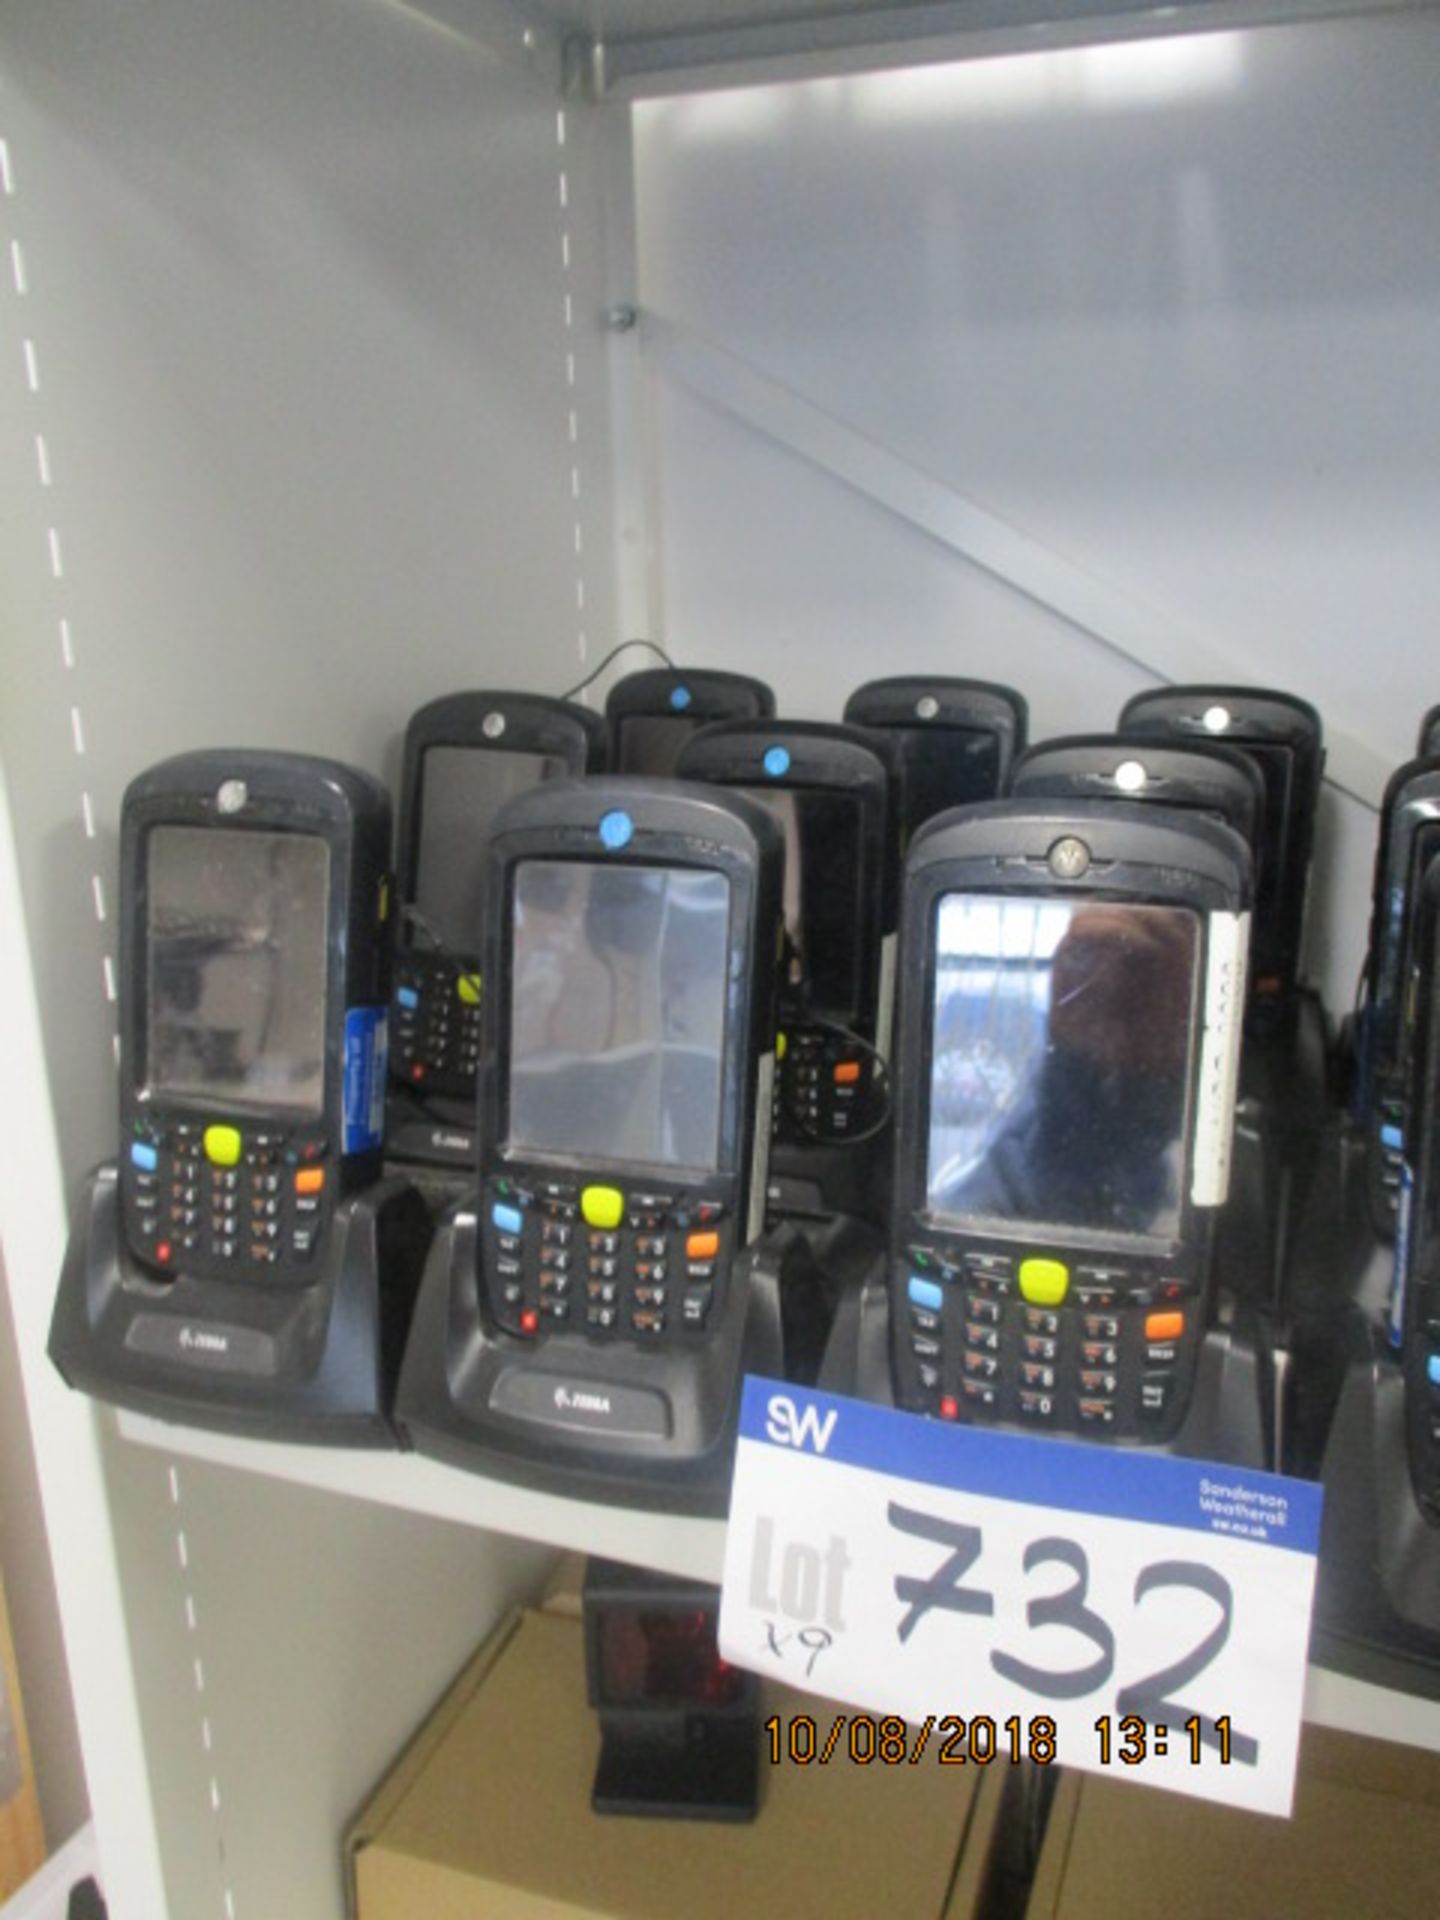 9 x Zebra Scanners, with Tower Chargers